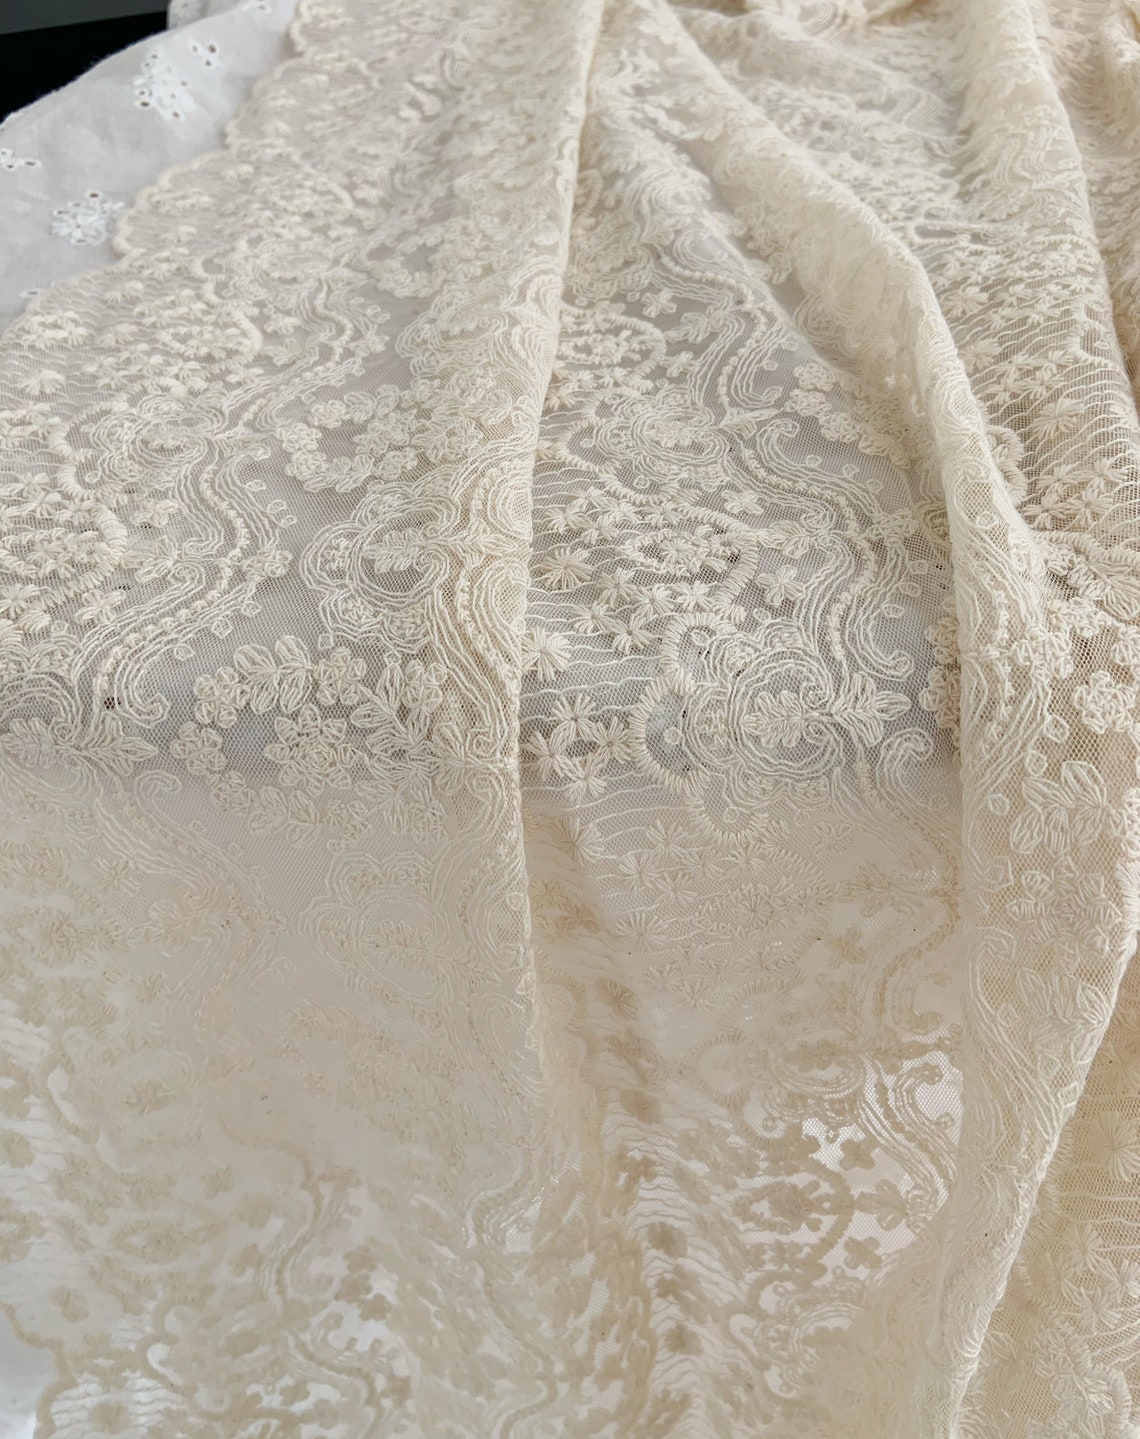 Ivory beige Embroidered tulle lace fabric with chevron | Etsy